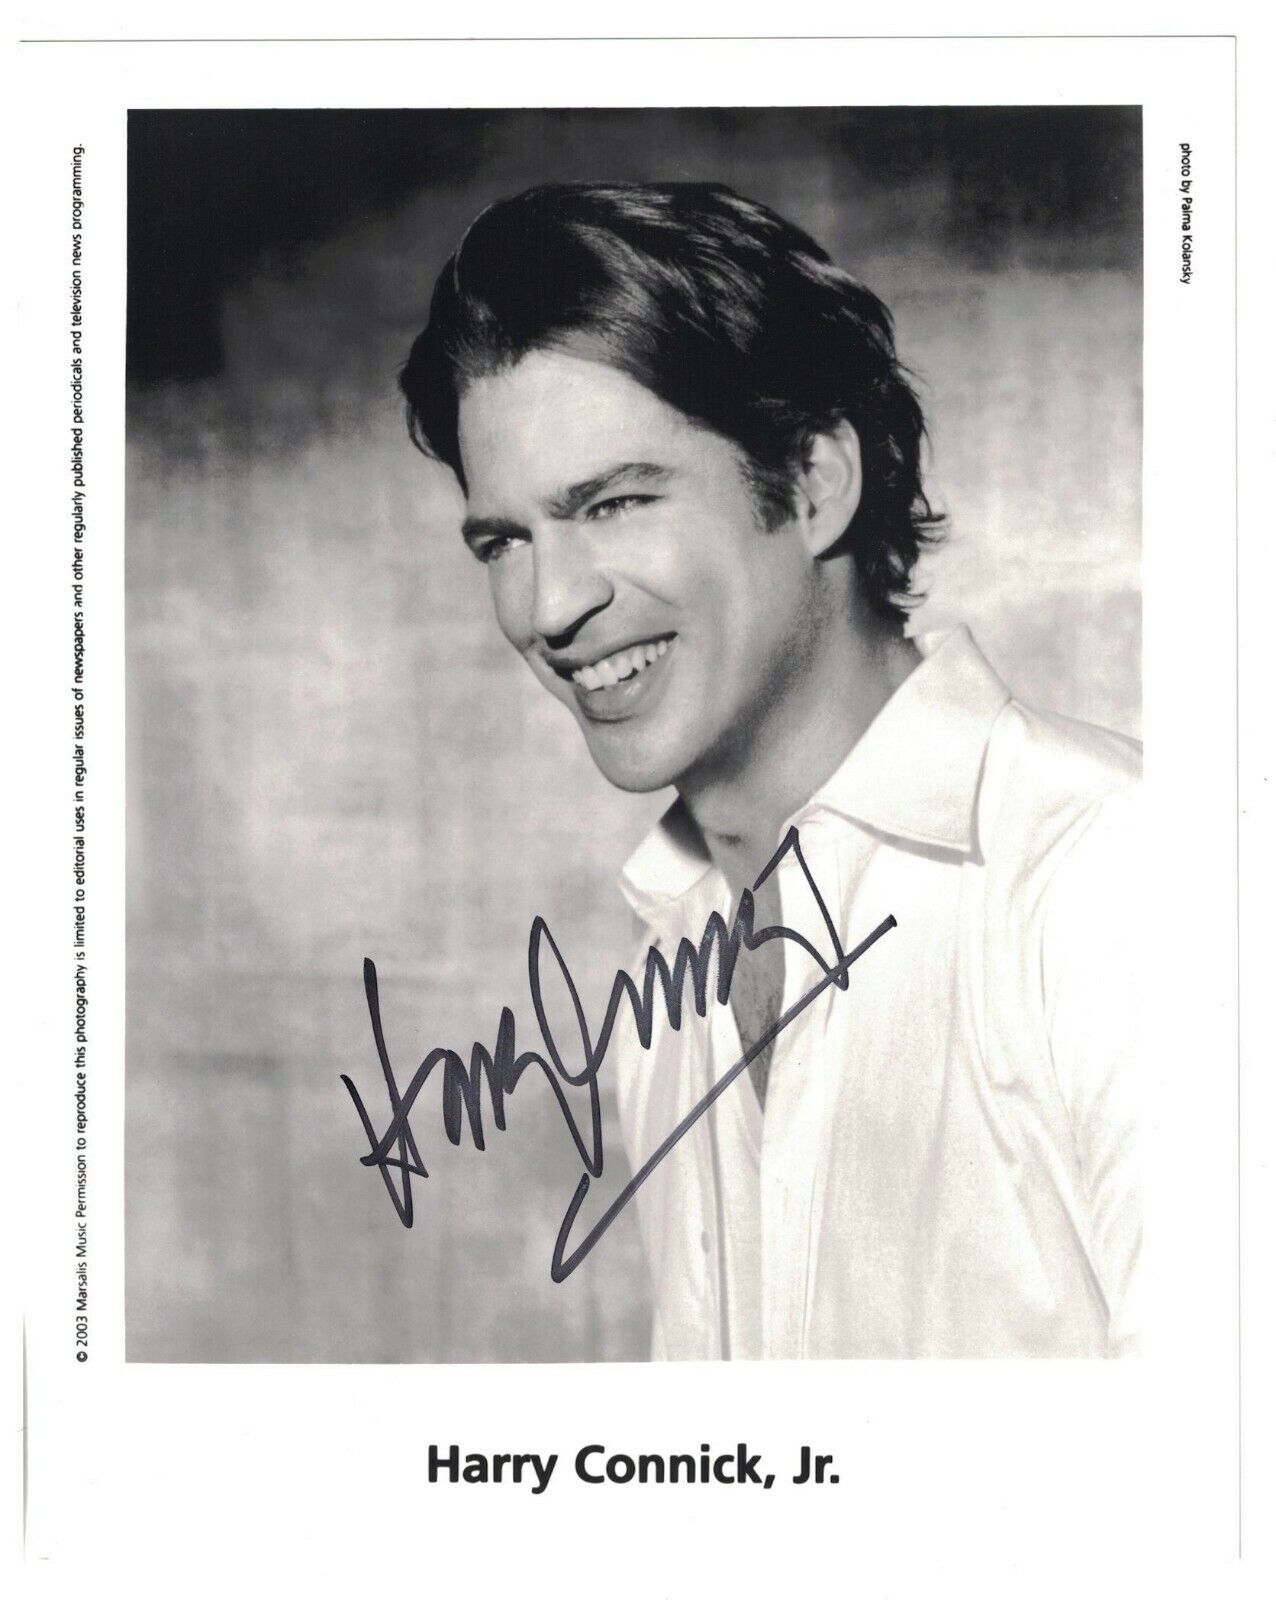 Harry Connick Jr. Signed Autographed 8 x 10 Photo Poster painting Actor Singer B